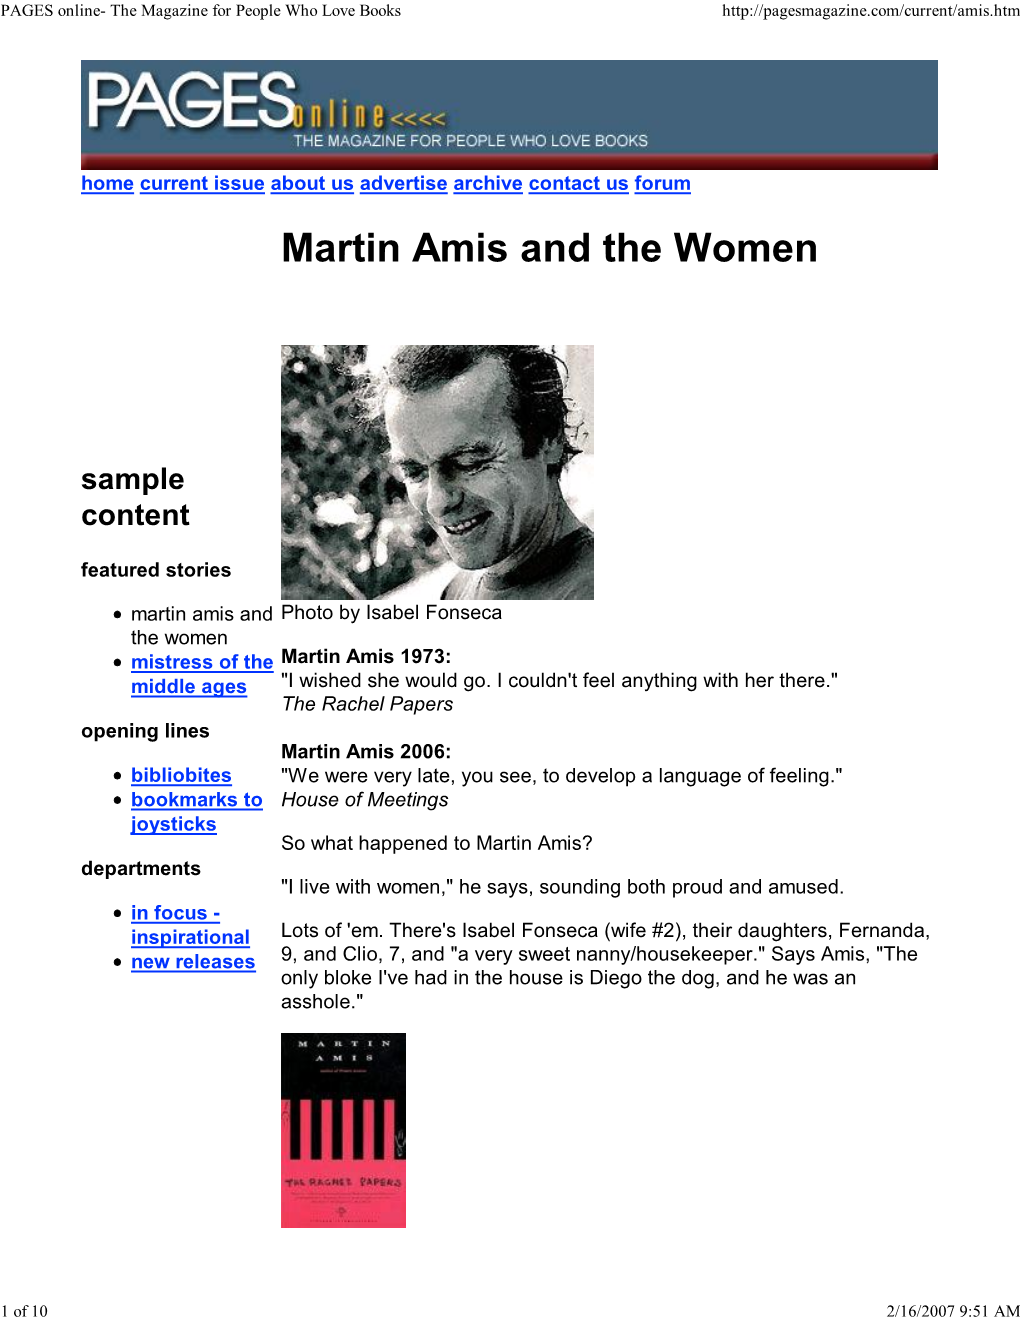 Martin Amis and the Women